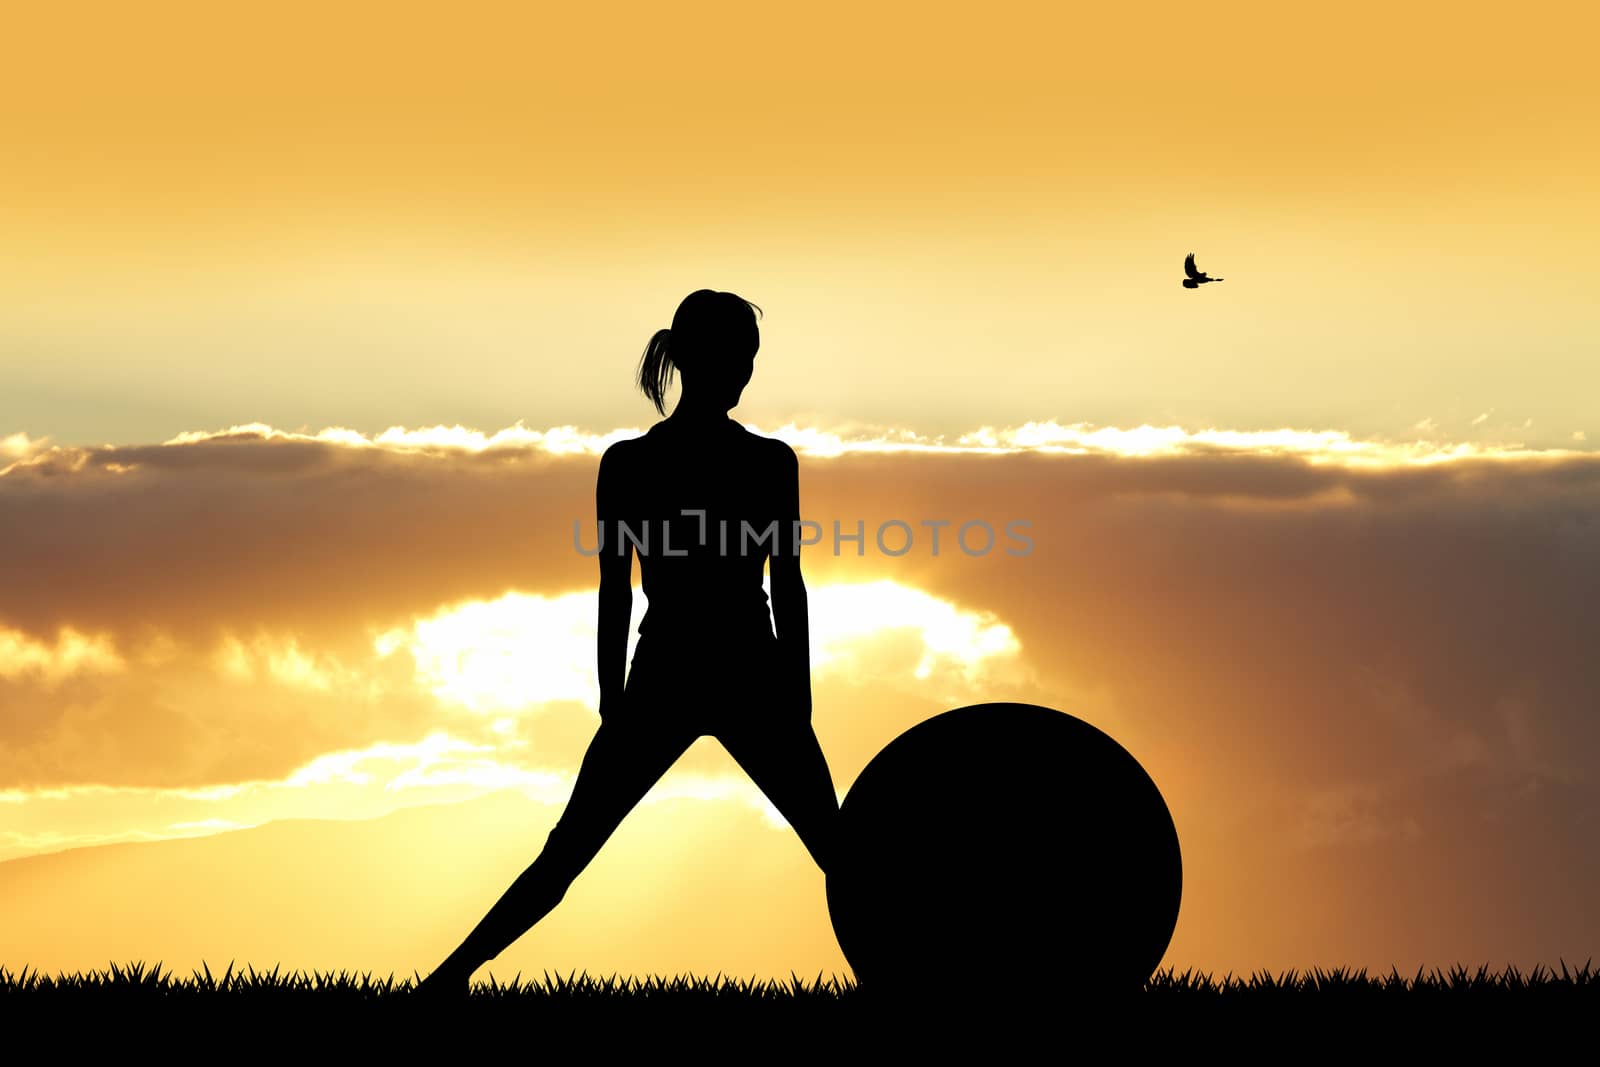 illustration of girl with pilates ball at sunset